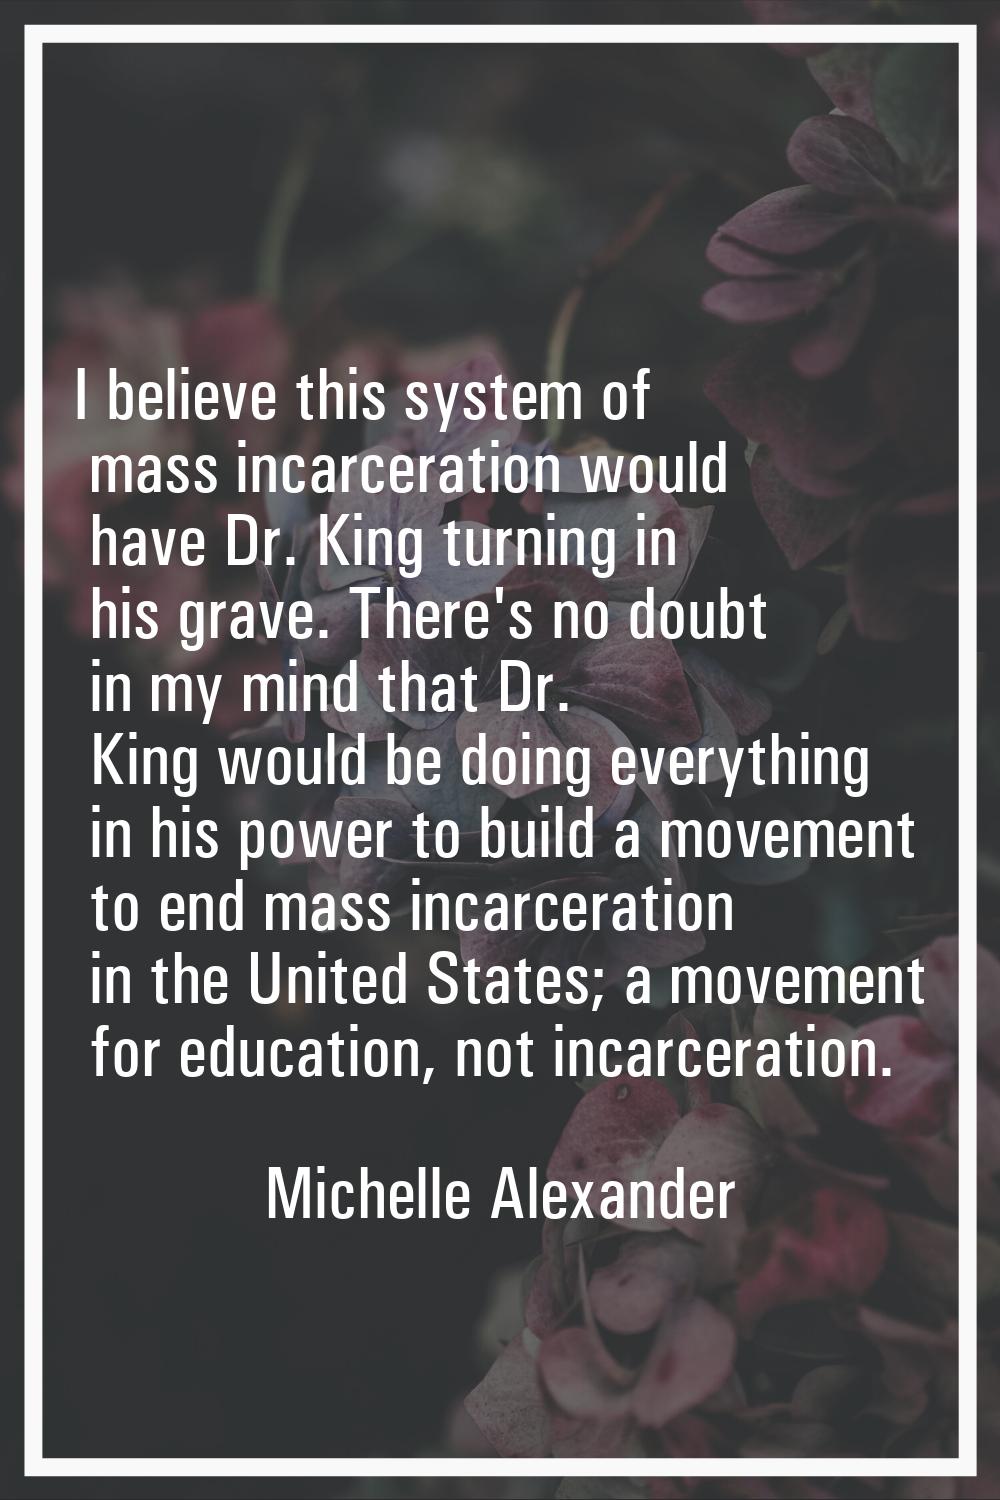 I believe this system of mass incarceration would have Dr. King turning in his grave. There's no do